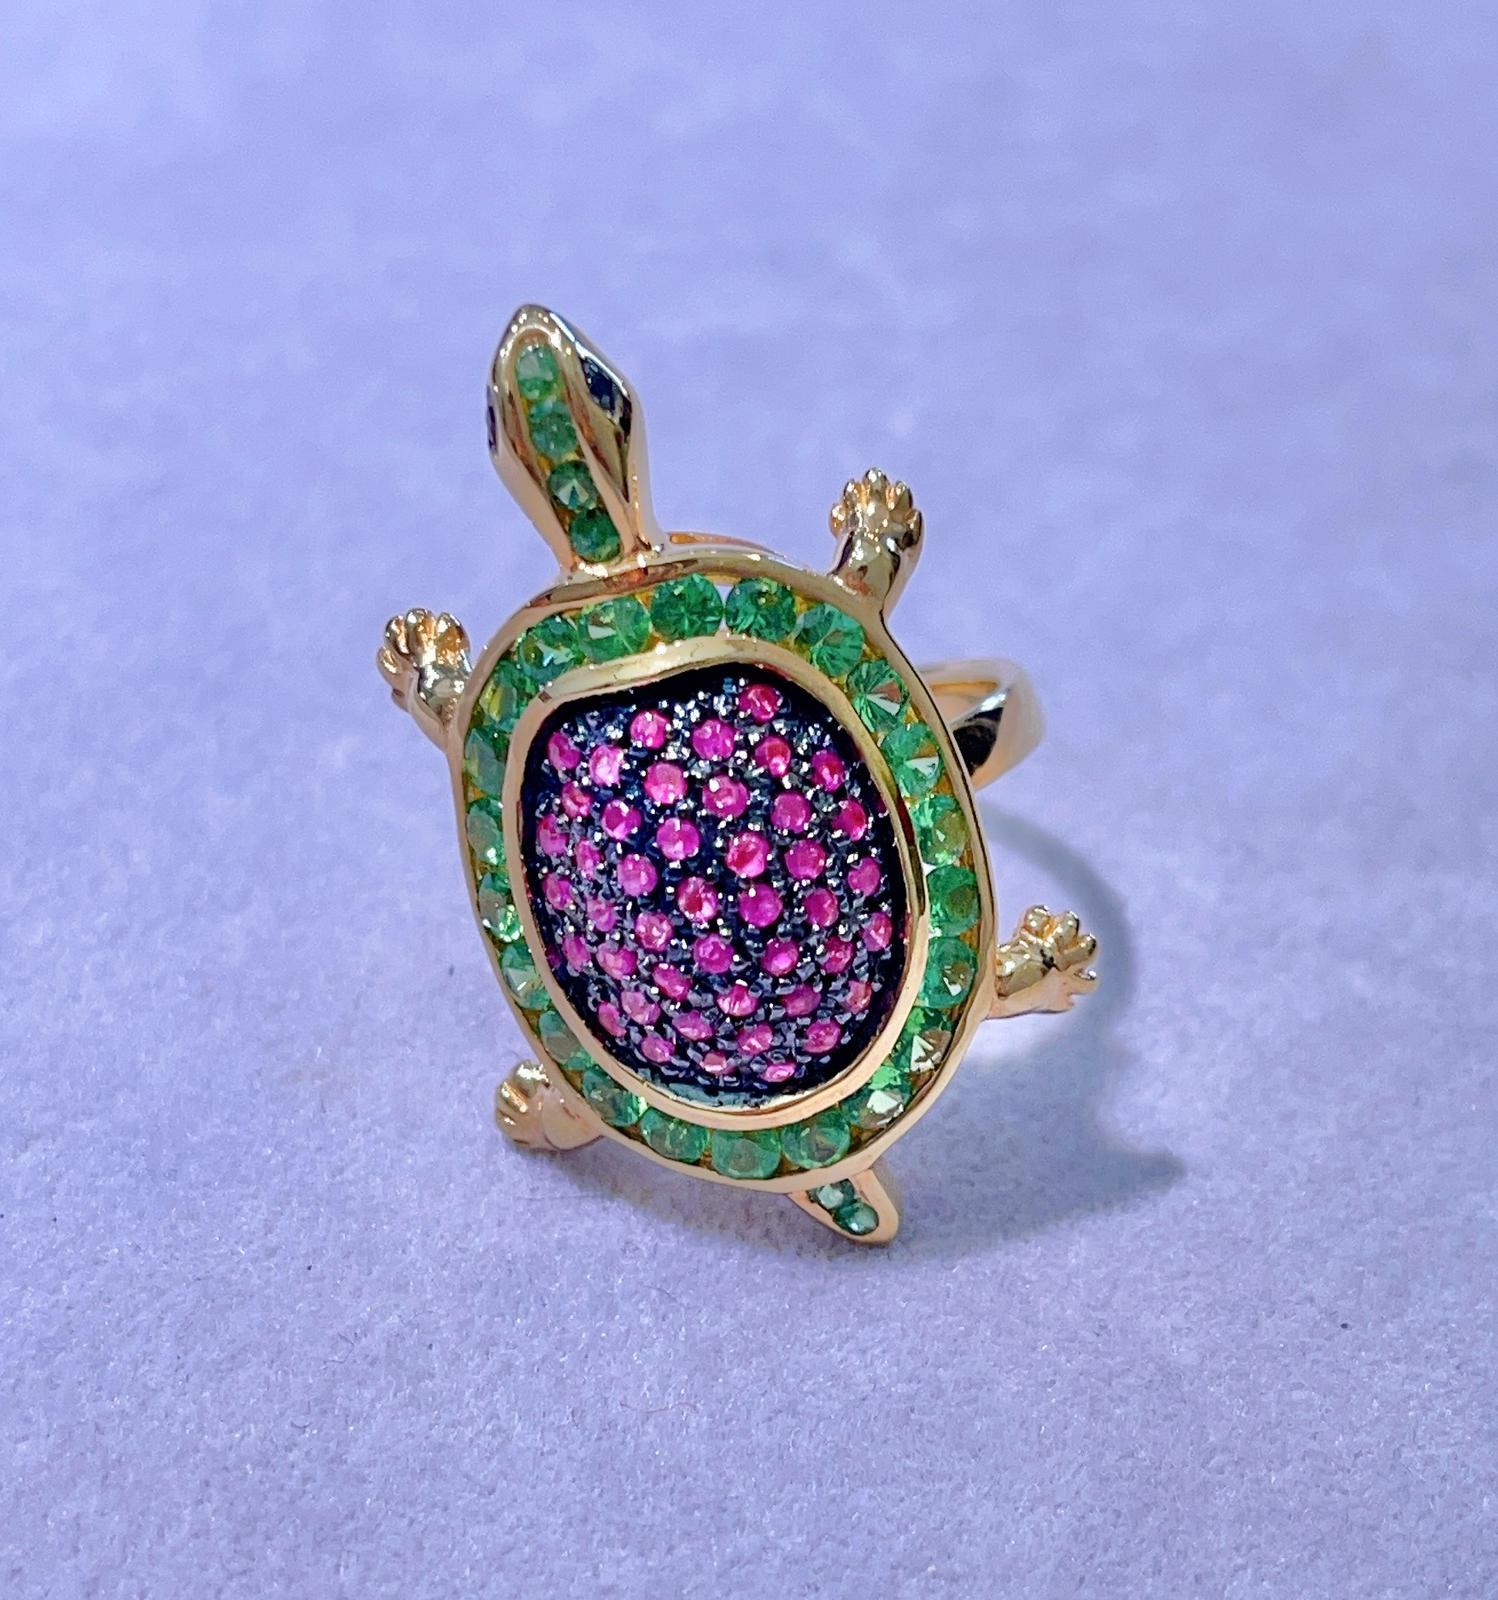 Brilliant Cut BOCHIC “Orient” Green Emerald & Pinksapphire Cocktail Ring, 22k Gold & Silver